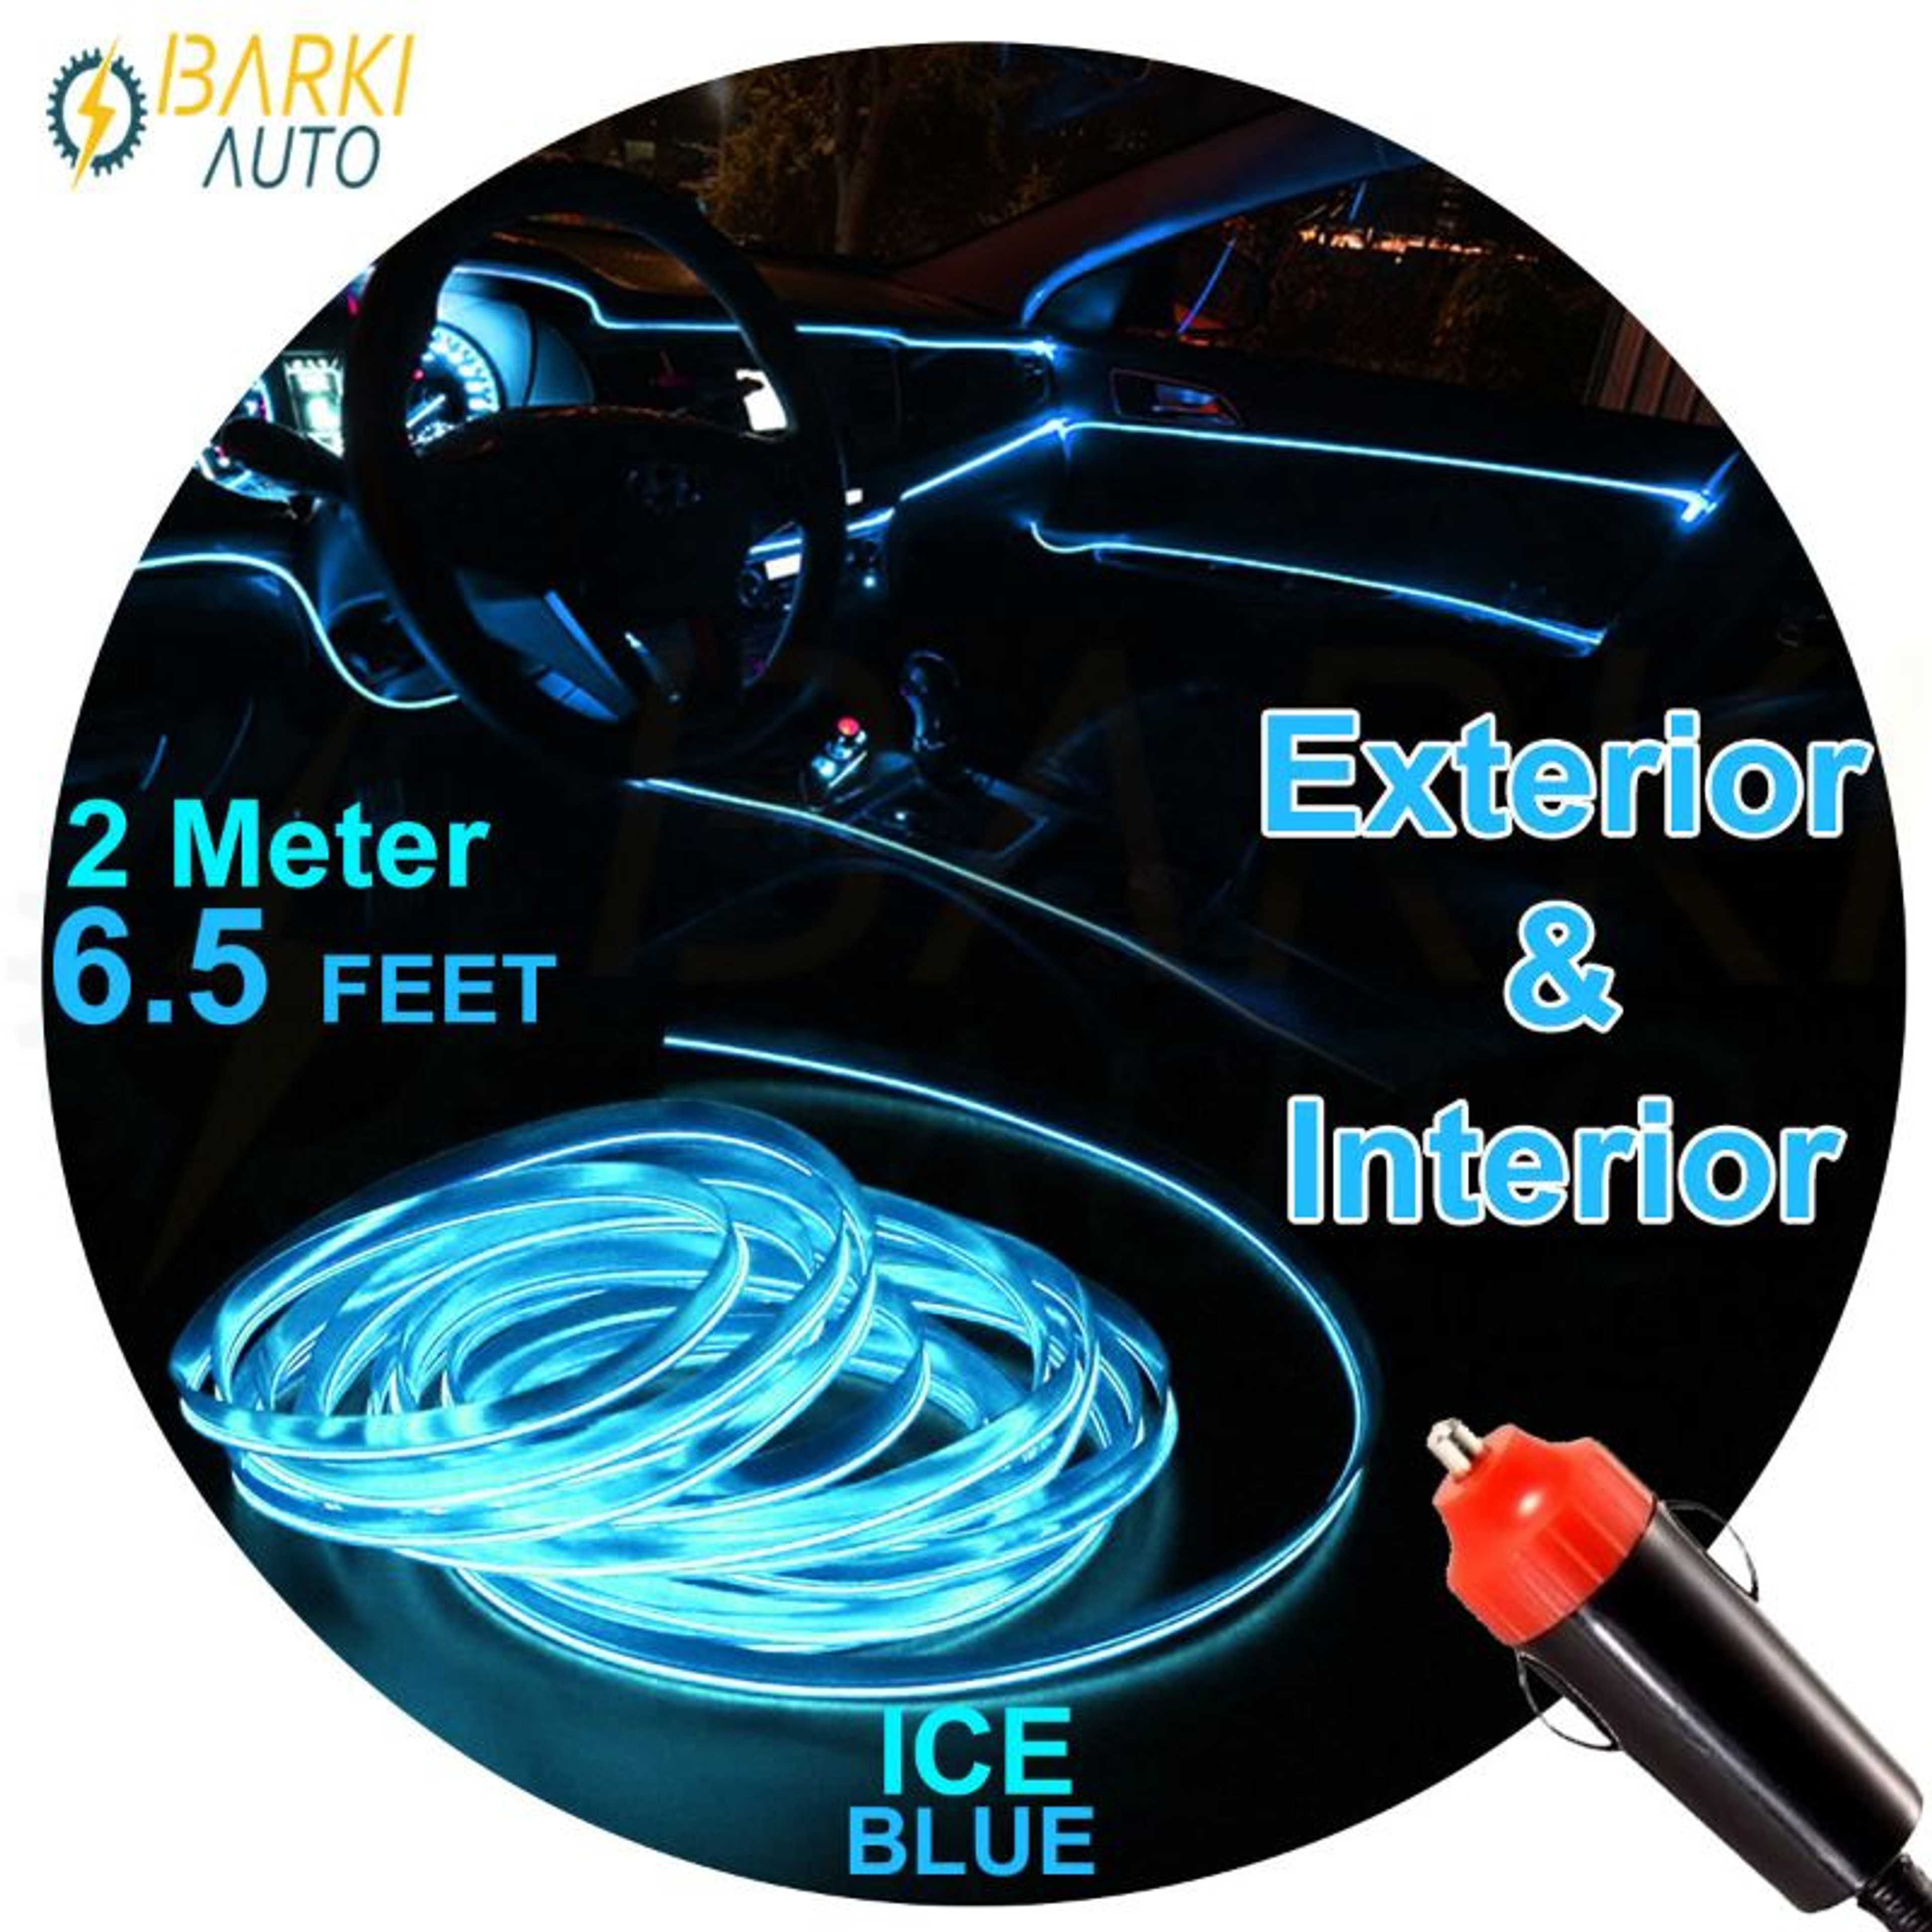 Car Dashboard Neon Ice Blue Color Light Wire with lighter plug holder 2 Meter (6.5 feet)